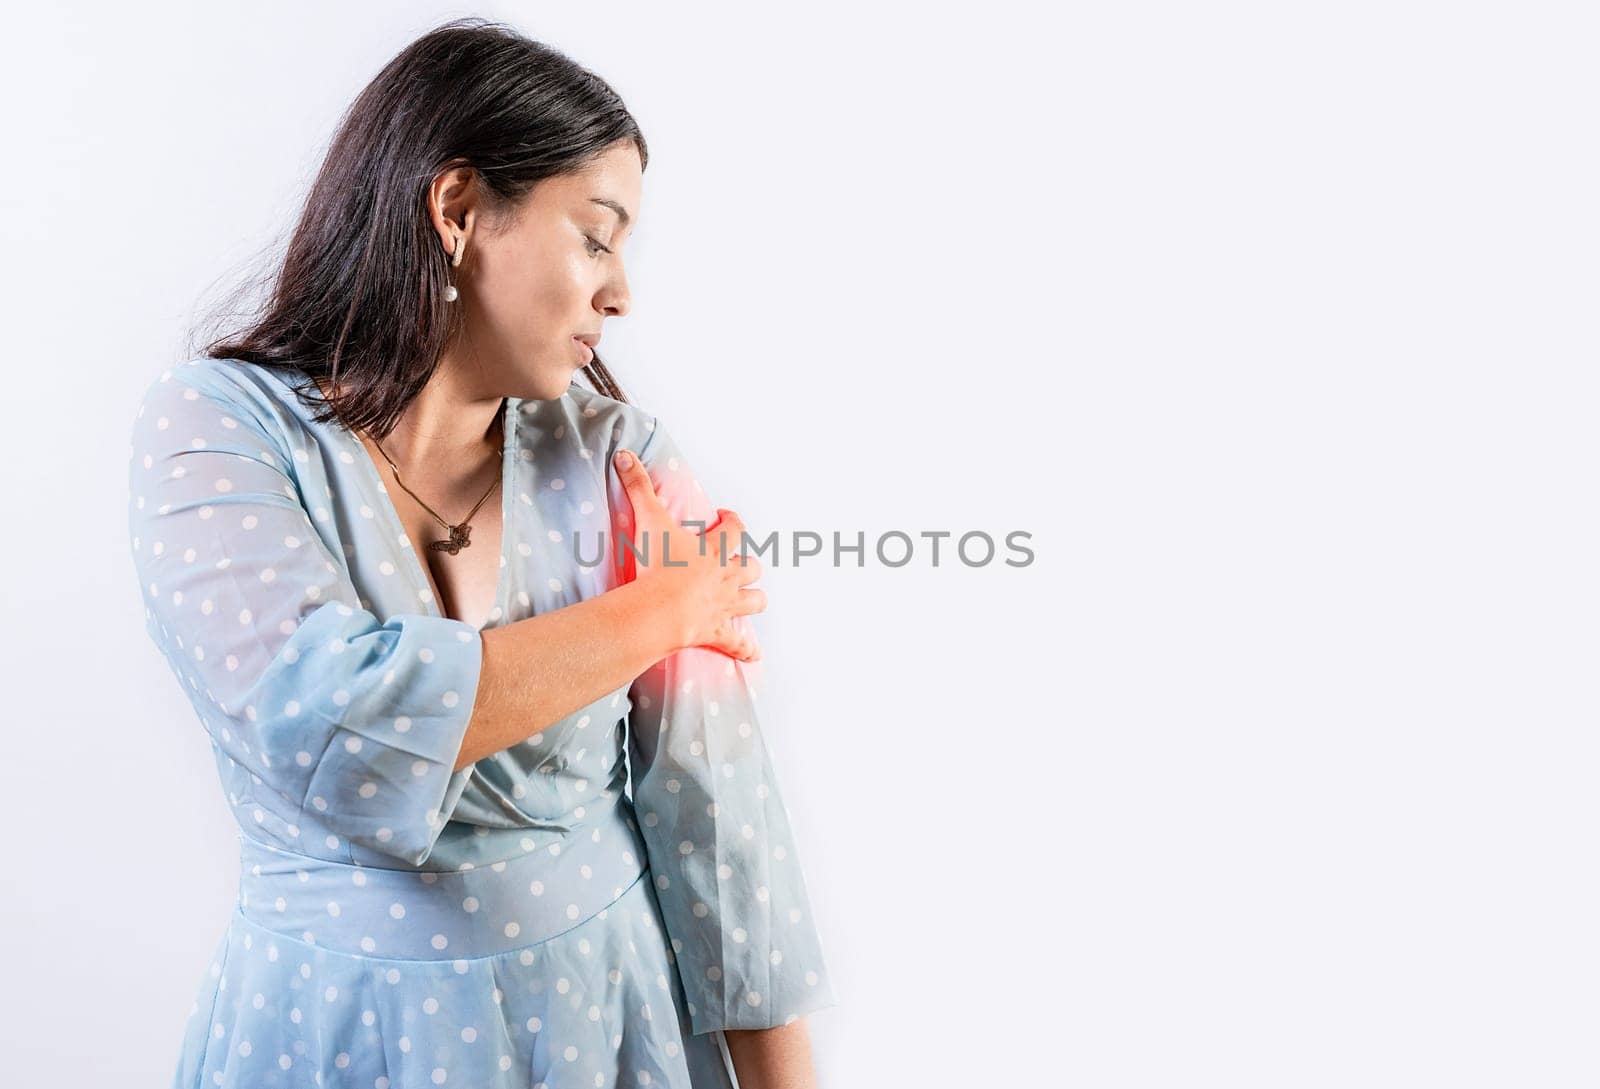 Woman with pain touching shoulder isolated. People with shoulder pain and tension on white background.